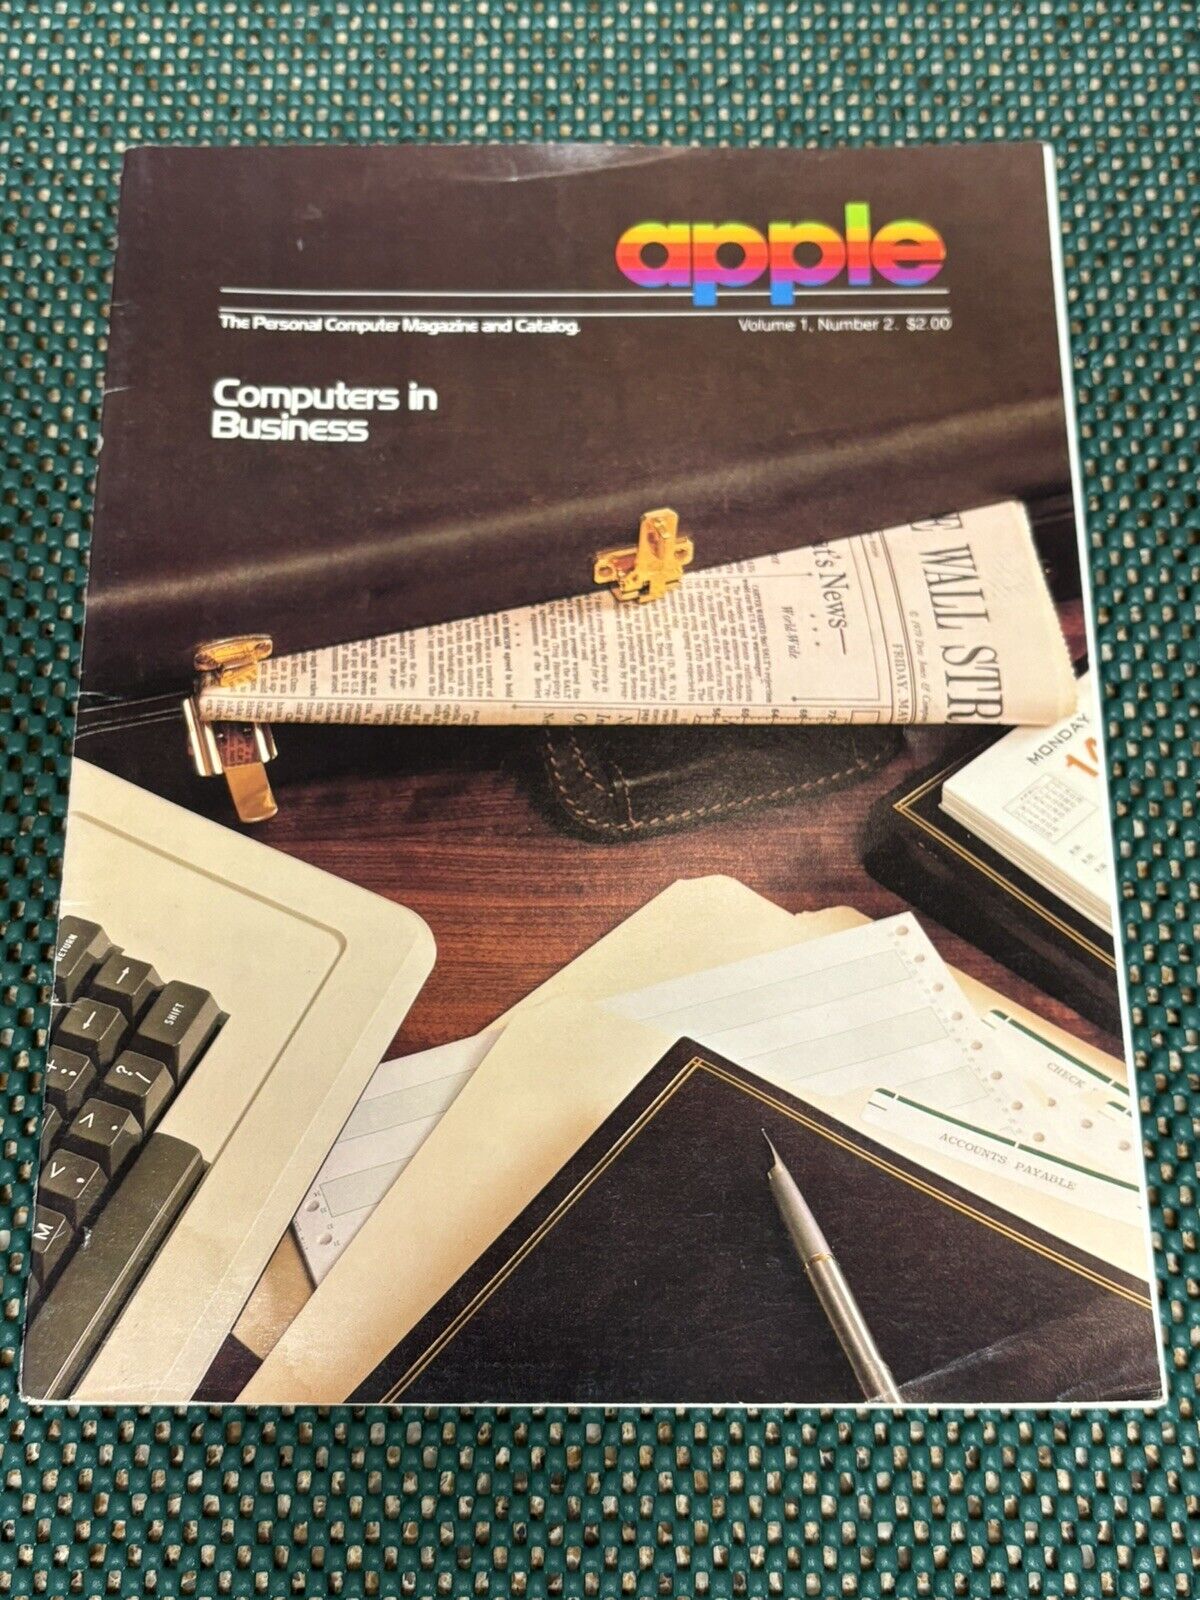 Vtg. 1979 Apple The Personal Computer Magazine Vol. 1 #2 Computers In Business